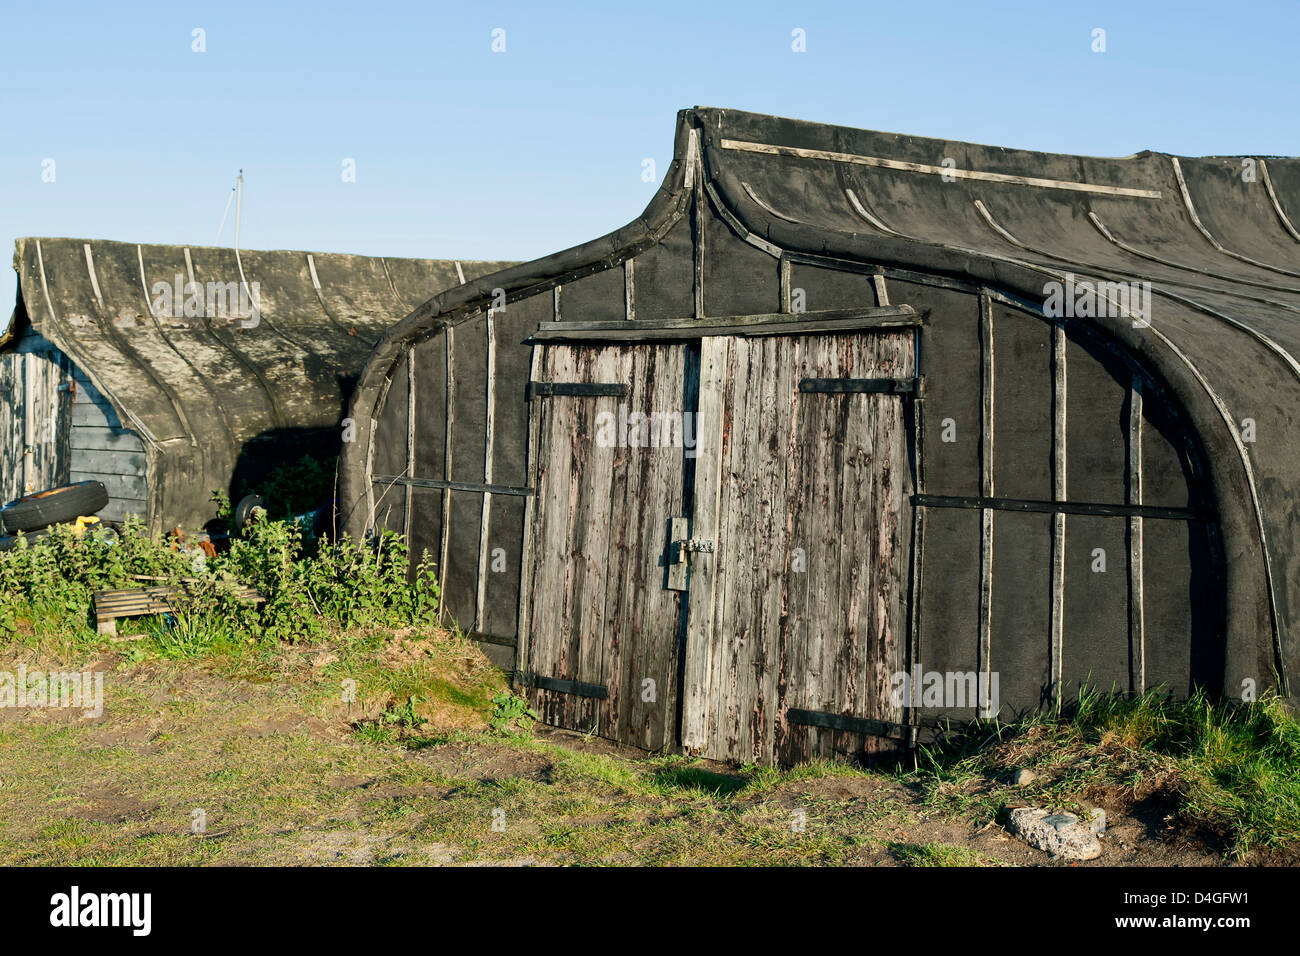 Bateaux, Holy Island, Angleterre, Royaume-Uni Banque D'Images